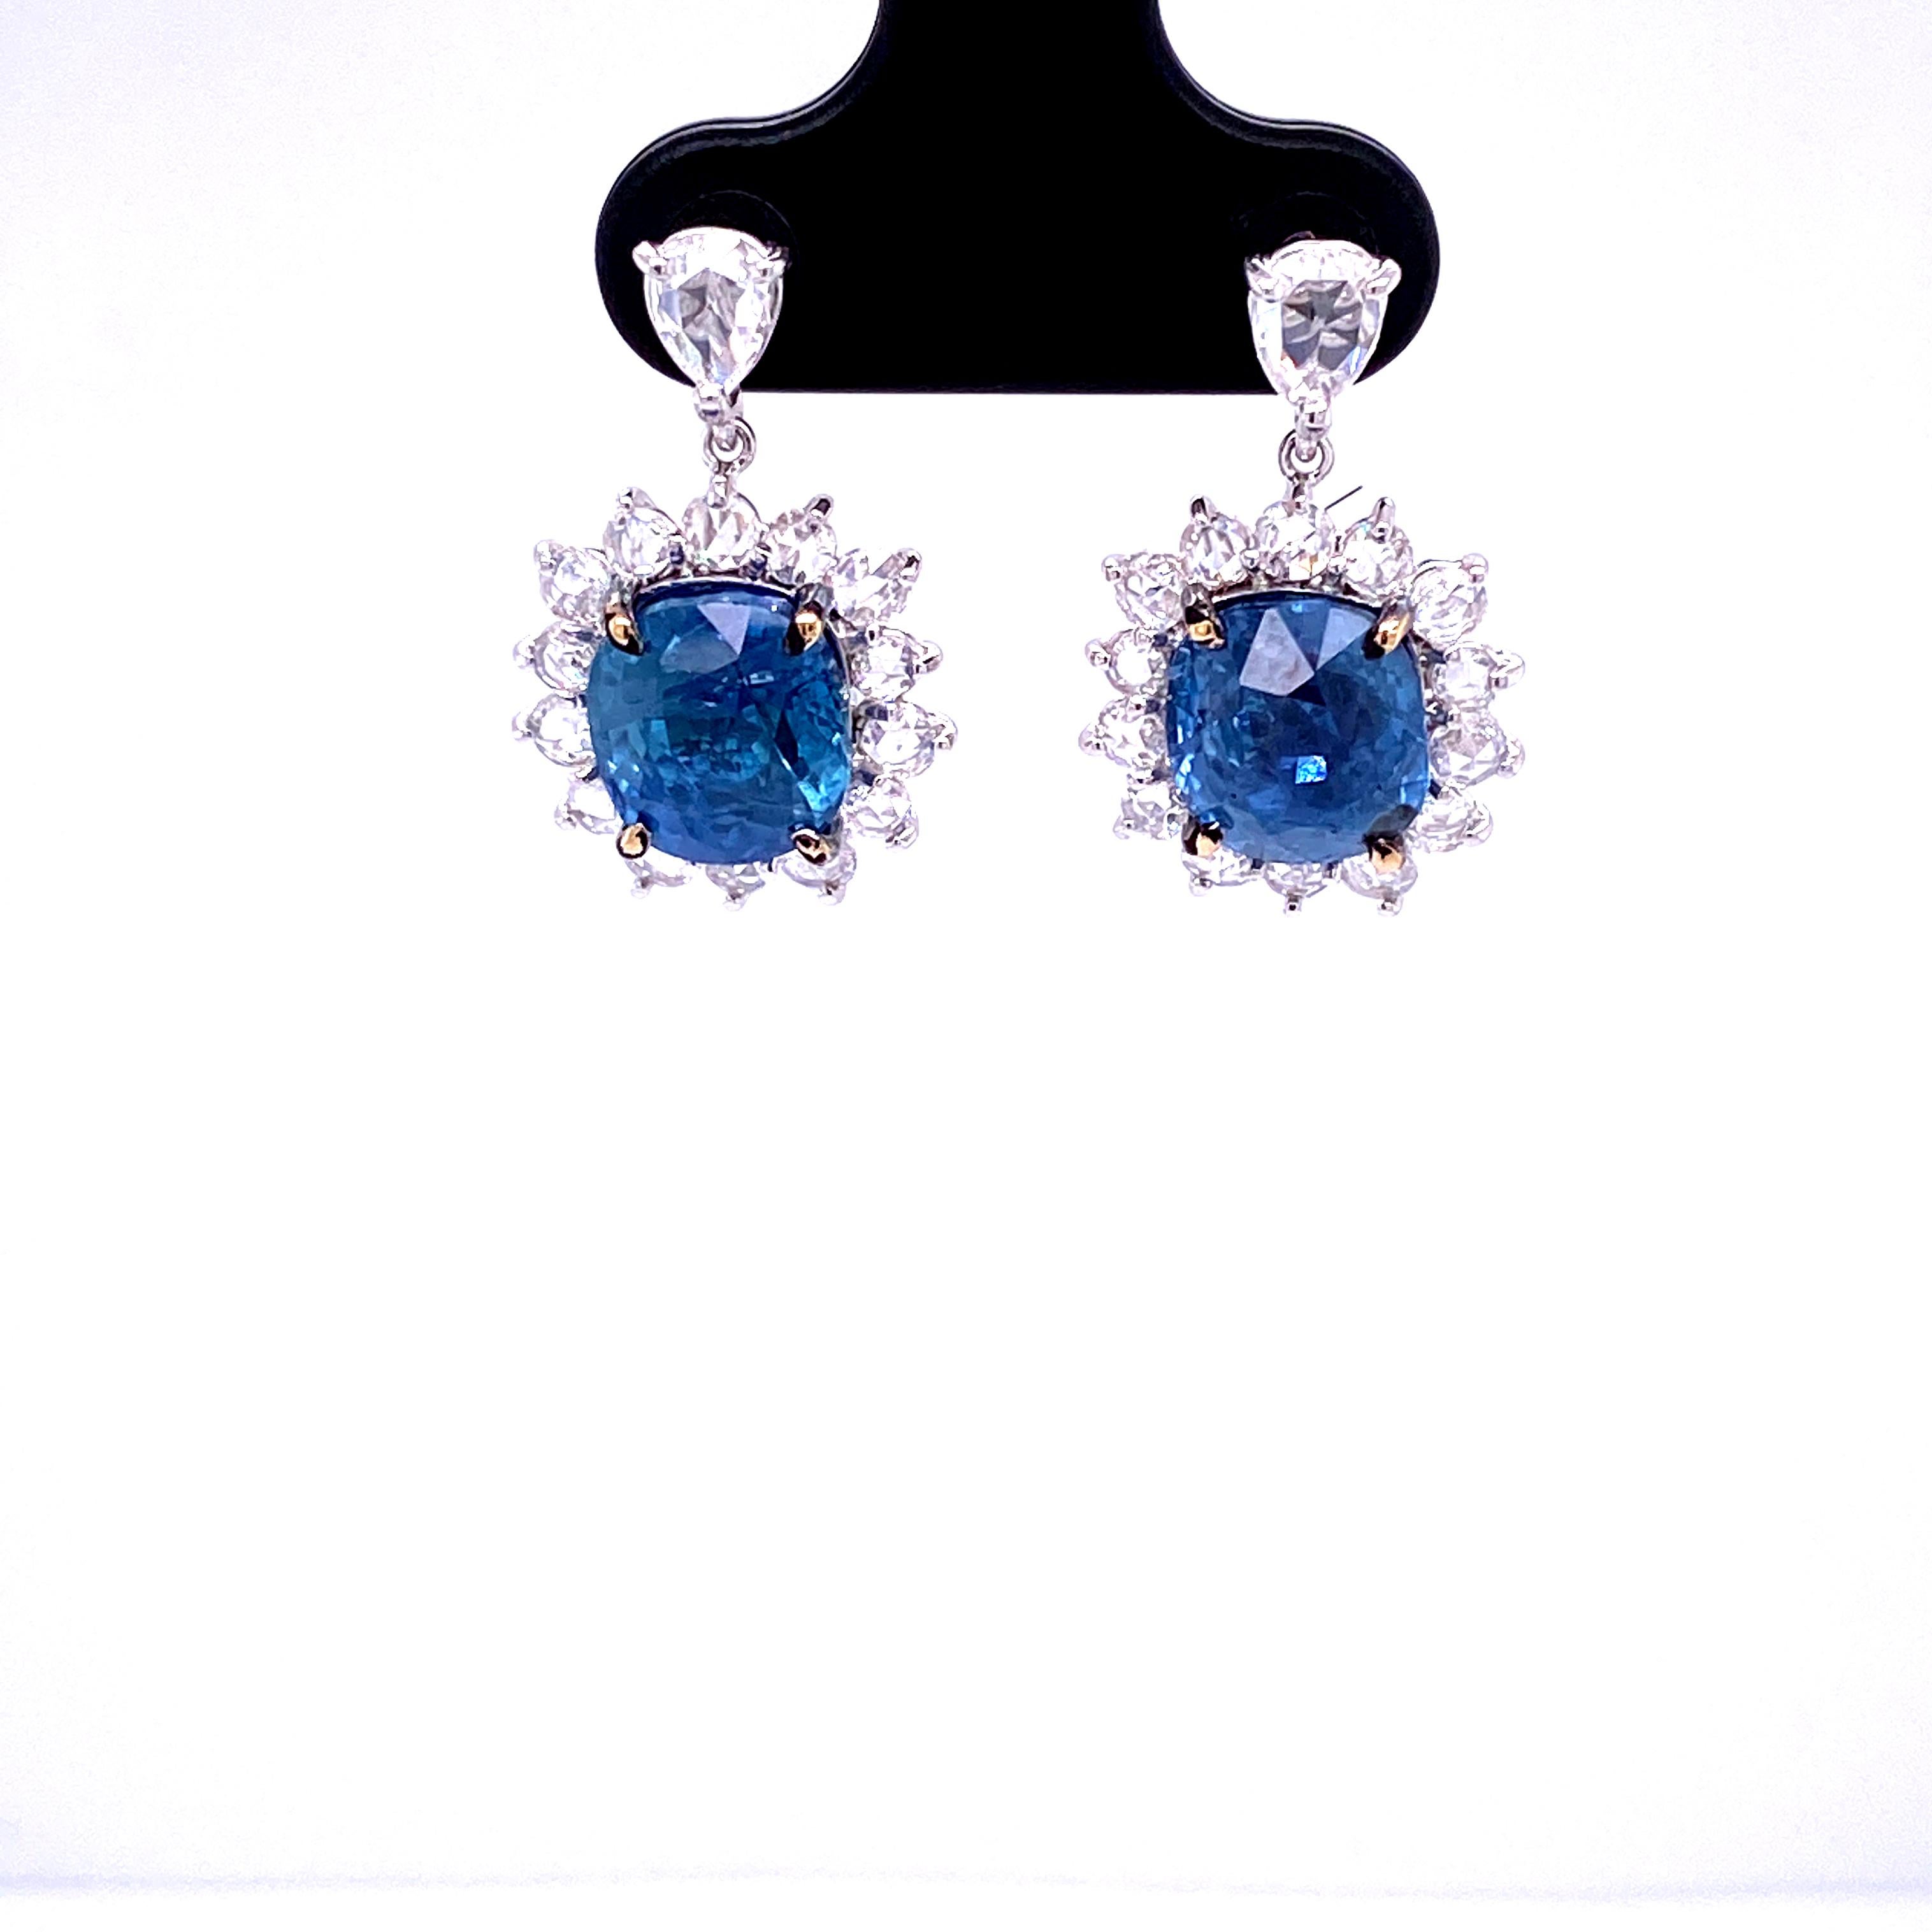 7.73 carat GRS Certified Unheated Burmese Sapphires and Diamond Gold Earrings:

A highly elegant pair of earrings, it features two spectacular natural unheated Burmese sapphires weighing a total of 7.73 carat, certified by GRS Lab, surrounded by a